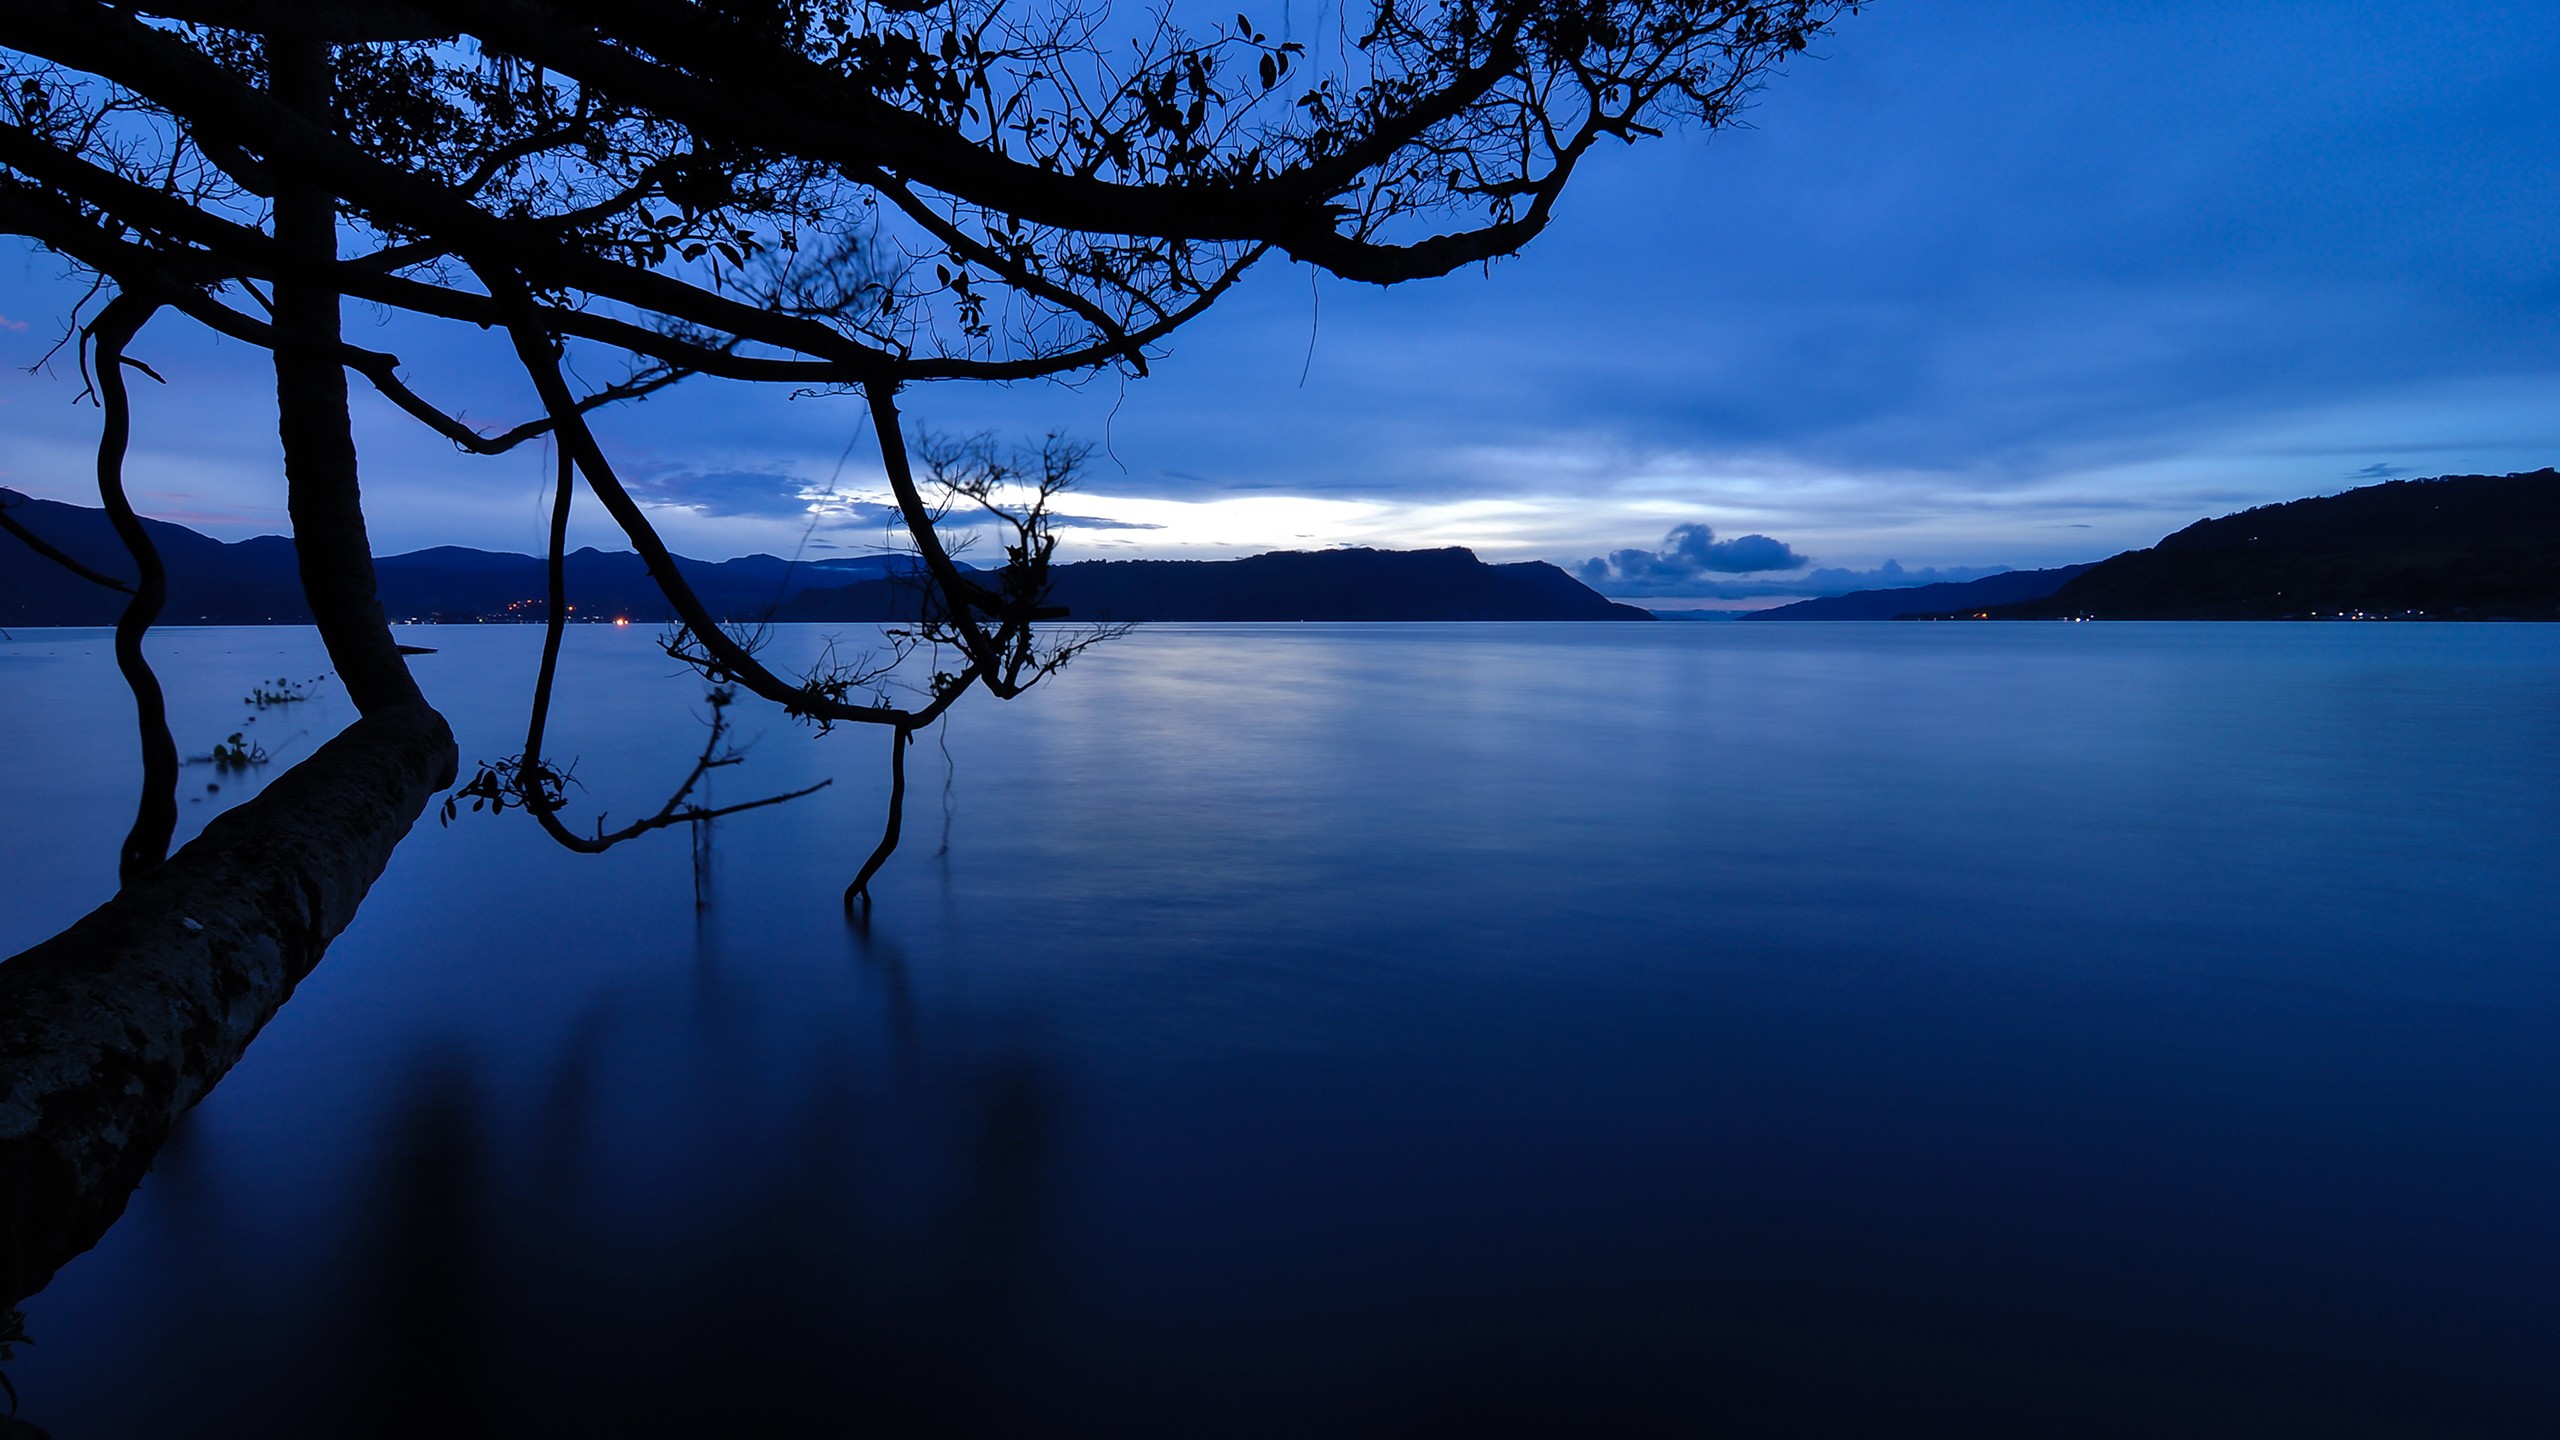 General 2560x1440 lake dark nature blue trees landscape calm waters water outdoors